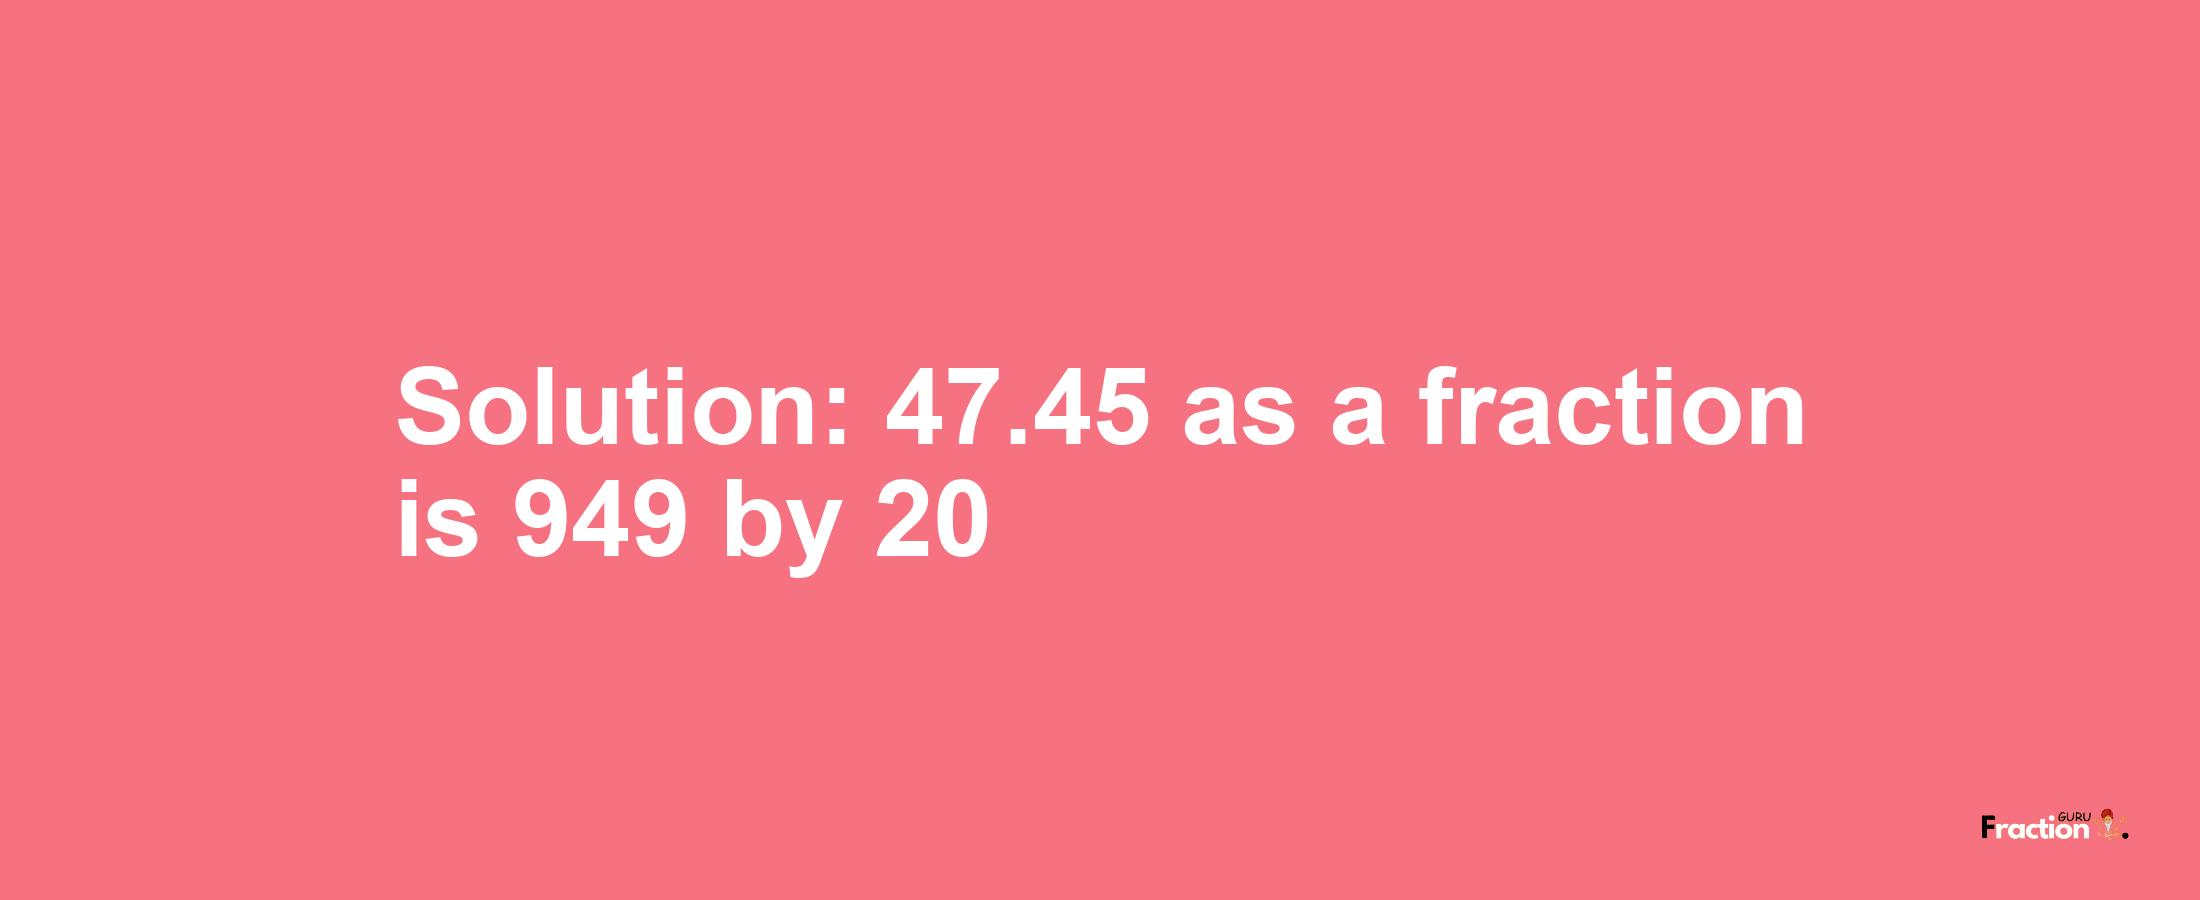 Solution:47.45 as a fraction is 949/20